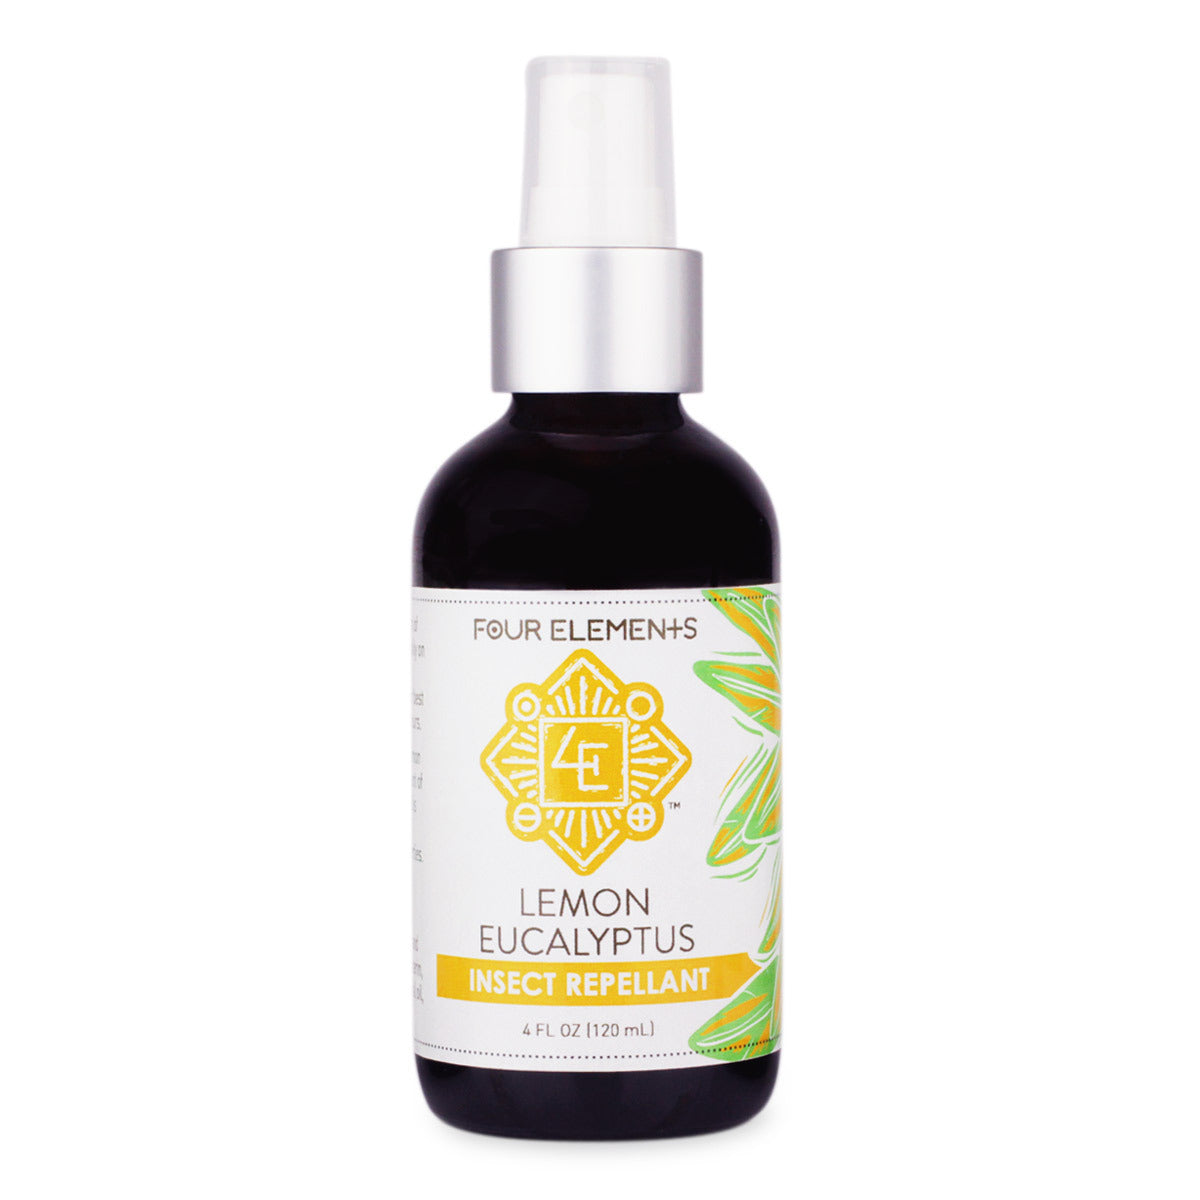 Primary image of Lemon Eucalyptus Insect Repellant